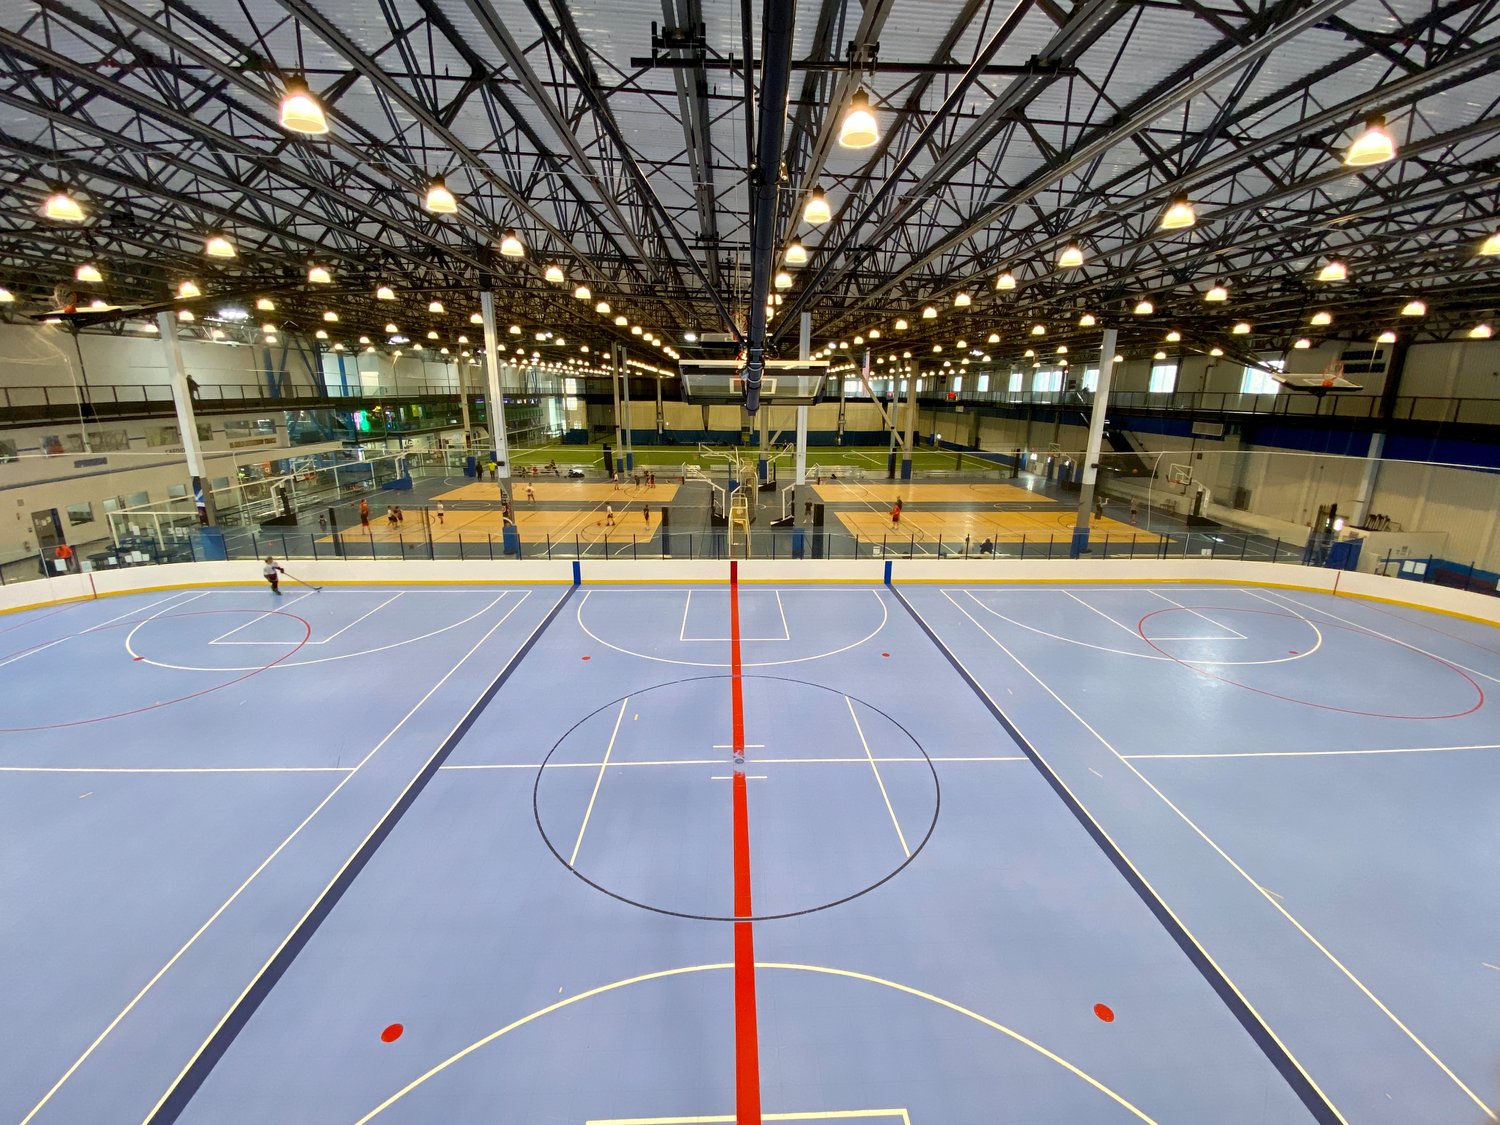 The Longplex Family & Sports Center covers 200,000 feet of indoor space in Tiverton's Industrial Park.